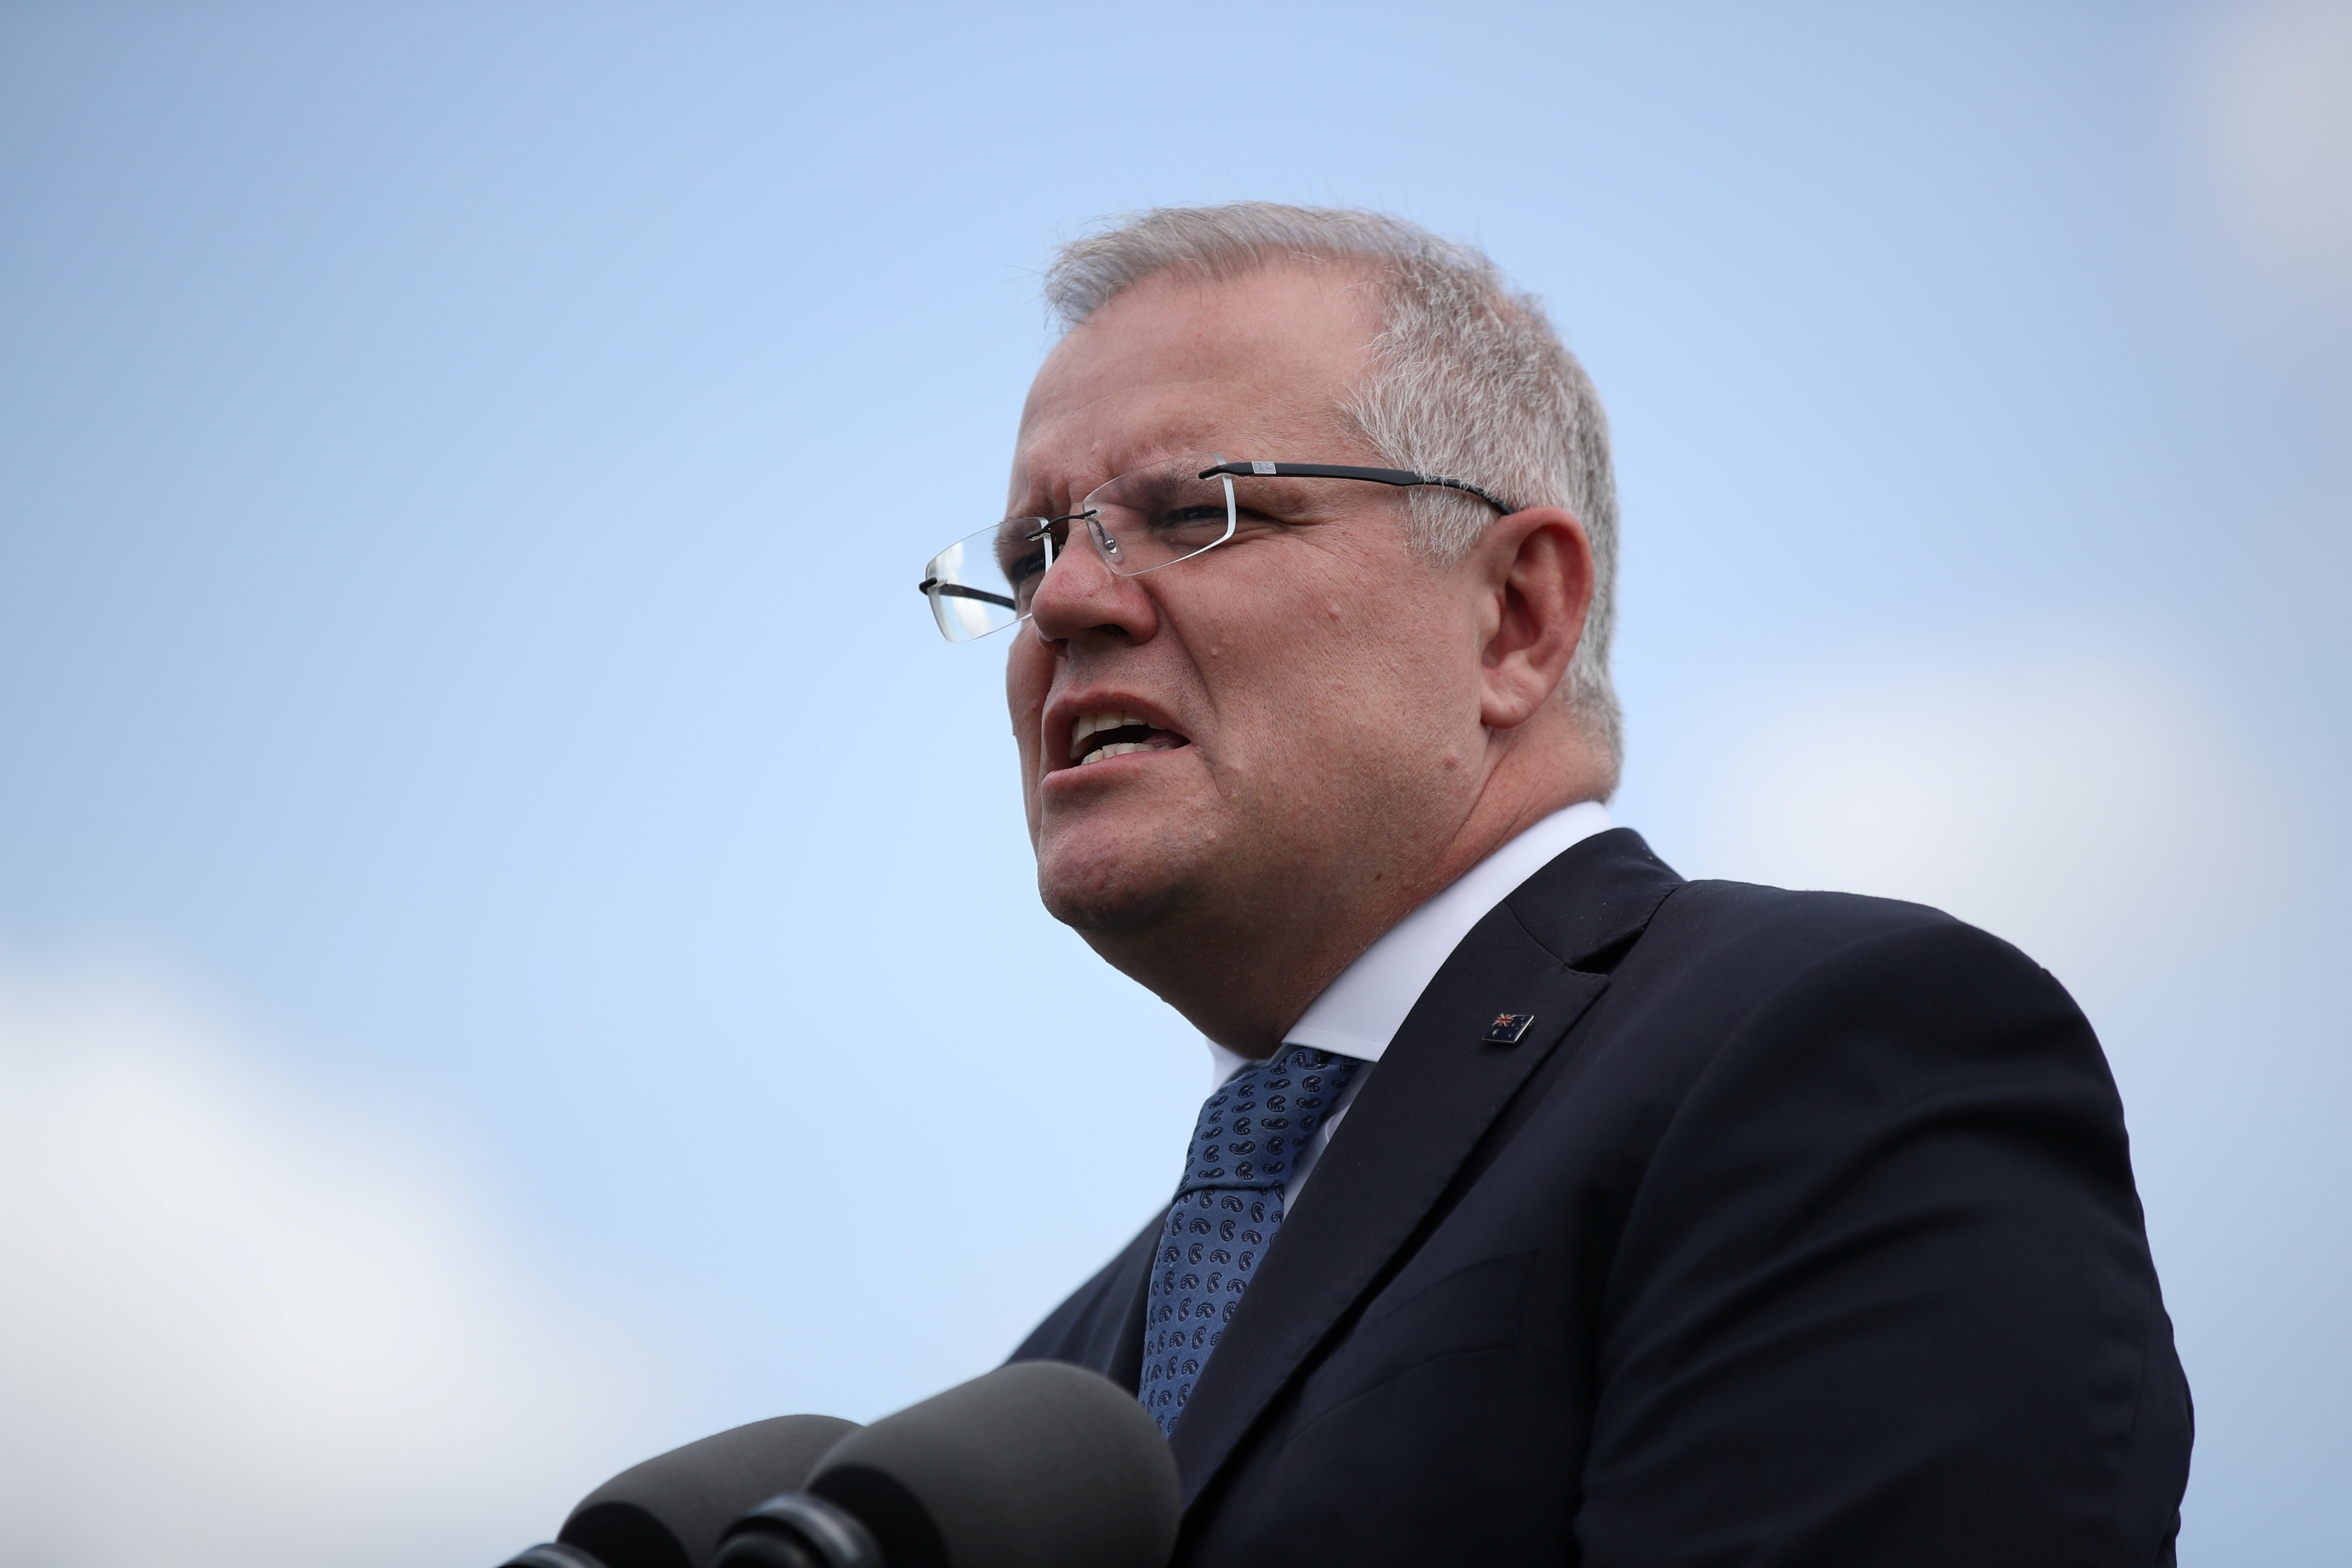 Australian Prime Minister Morrison speaks during a joint press conference at Admiralty House in Sydney